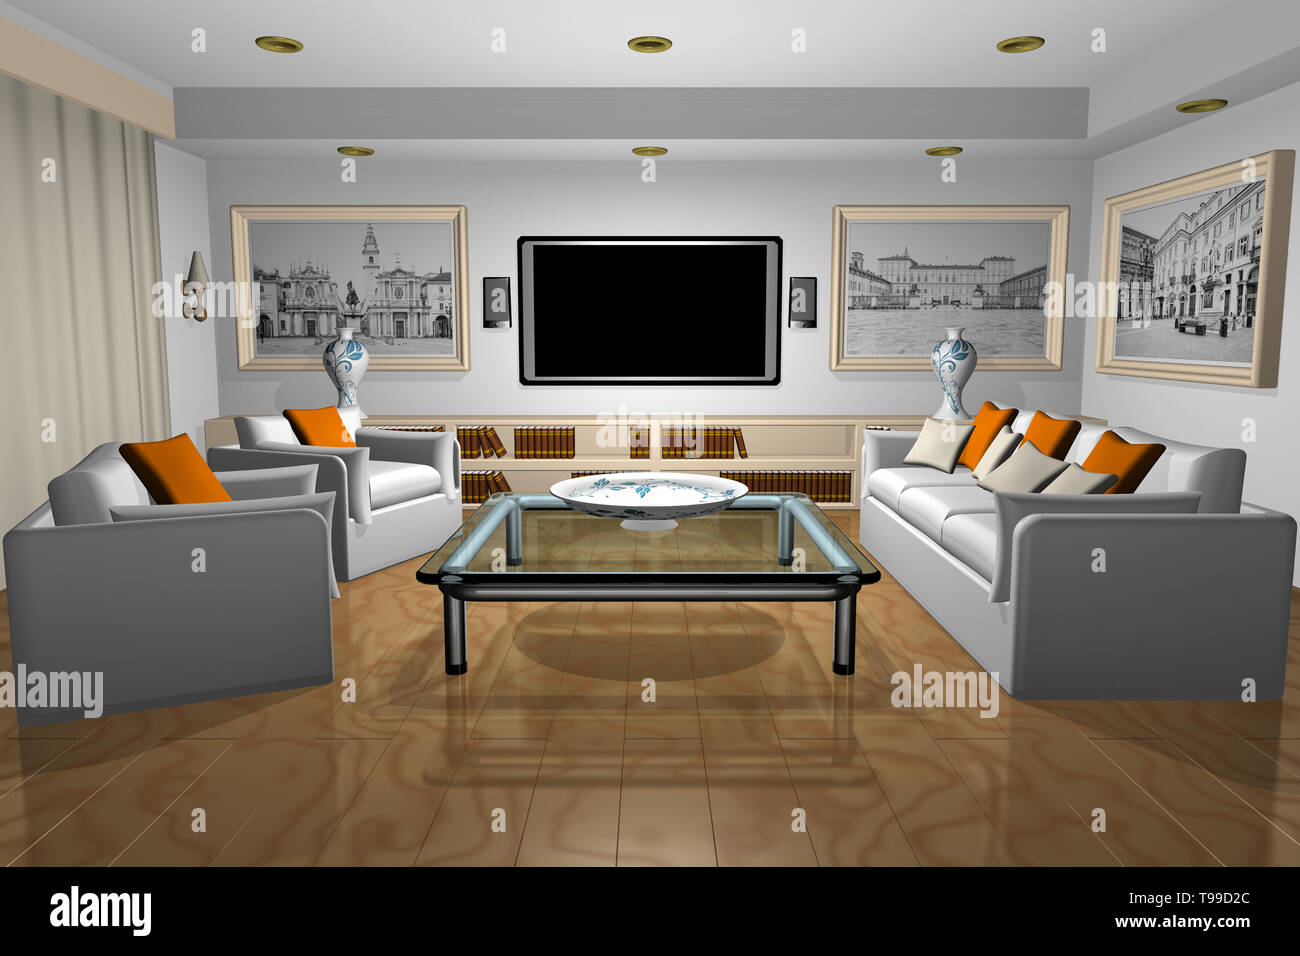 3d Illustration House Inside The Living Room With Tv Armchairs